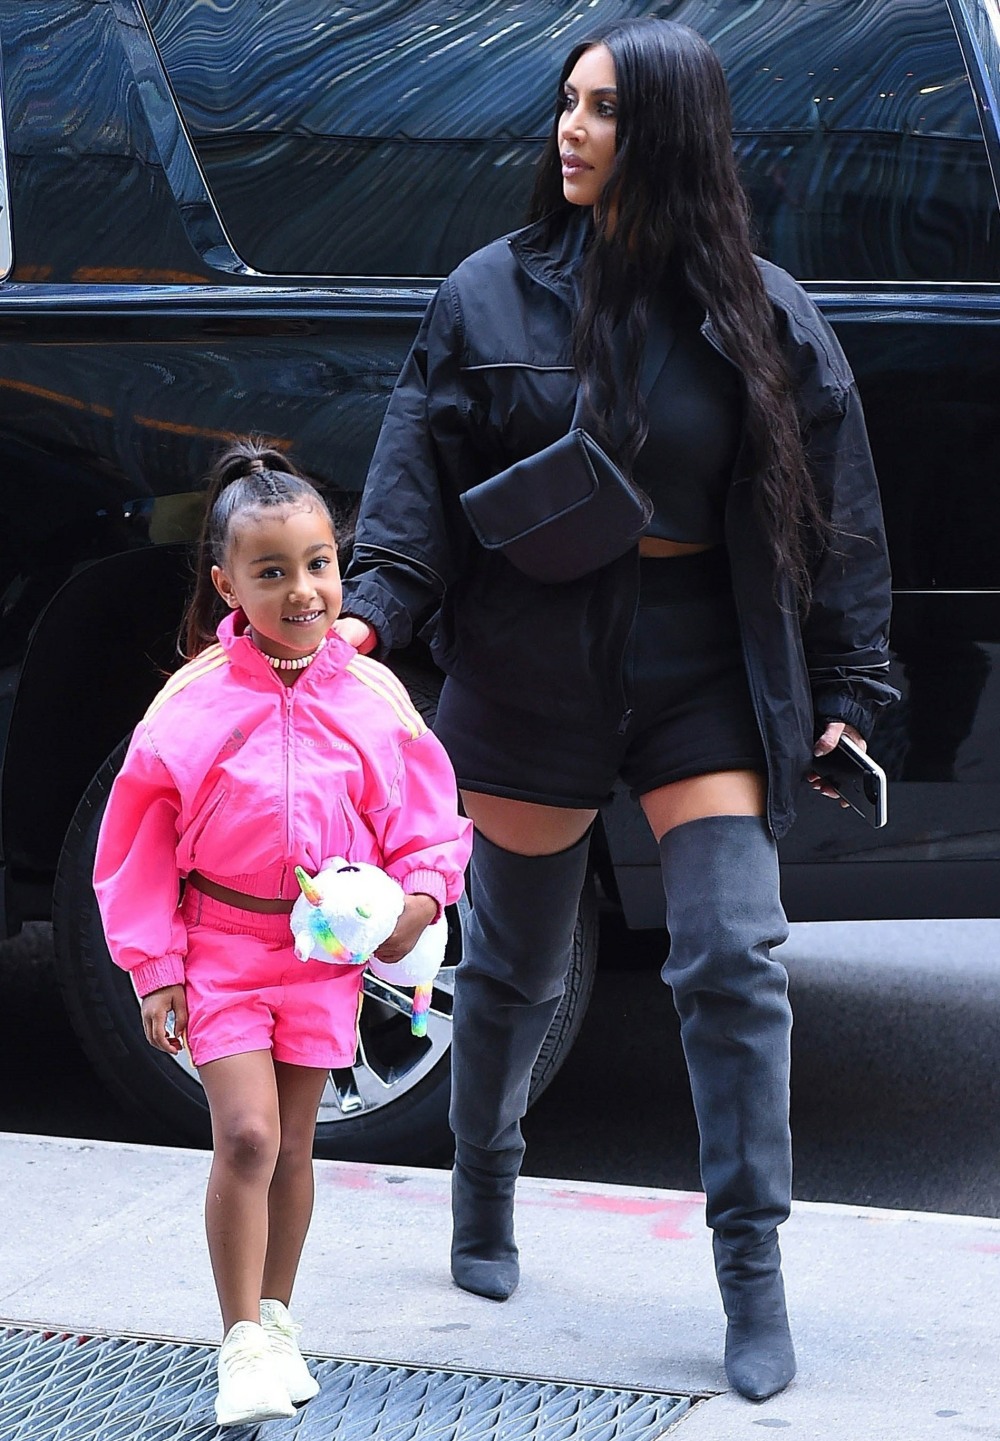 Kim Kardashian and North West enjoy at day out together